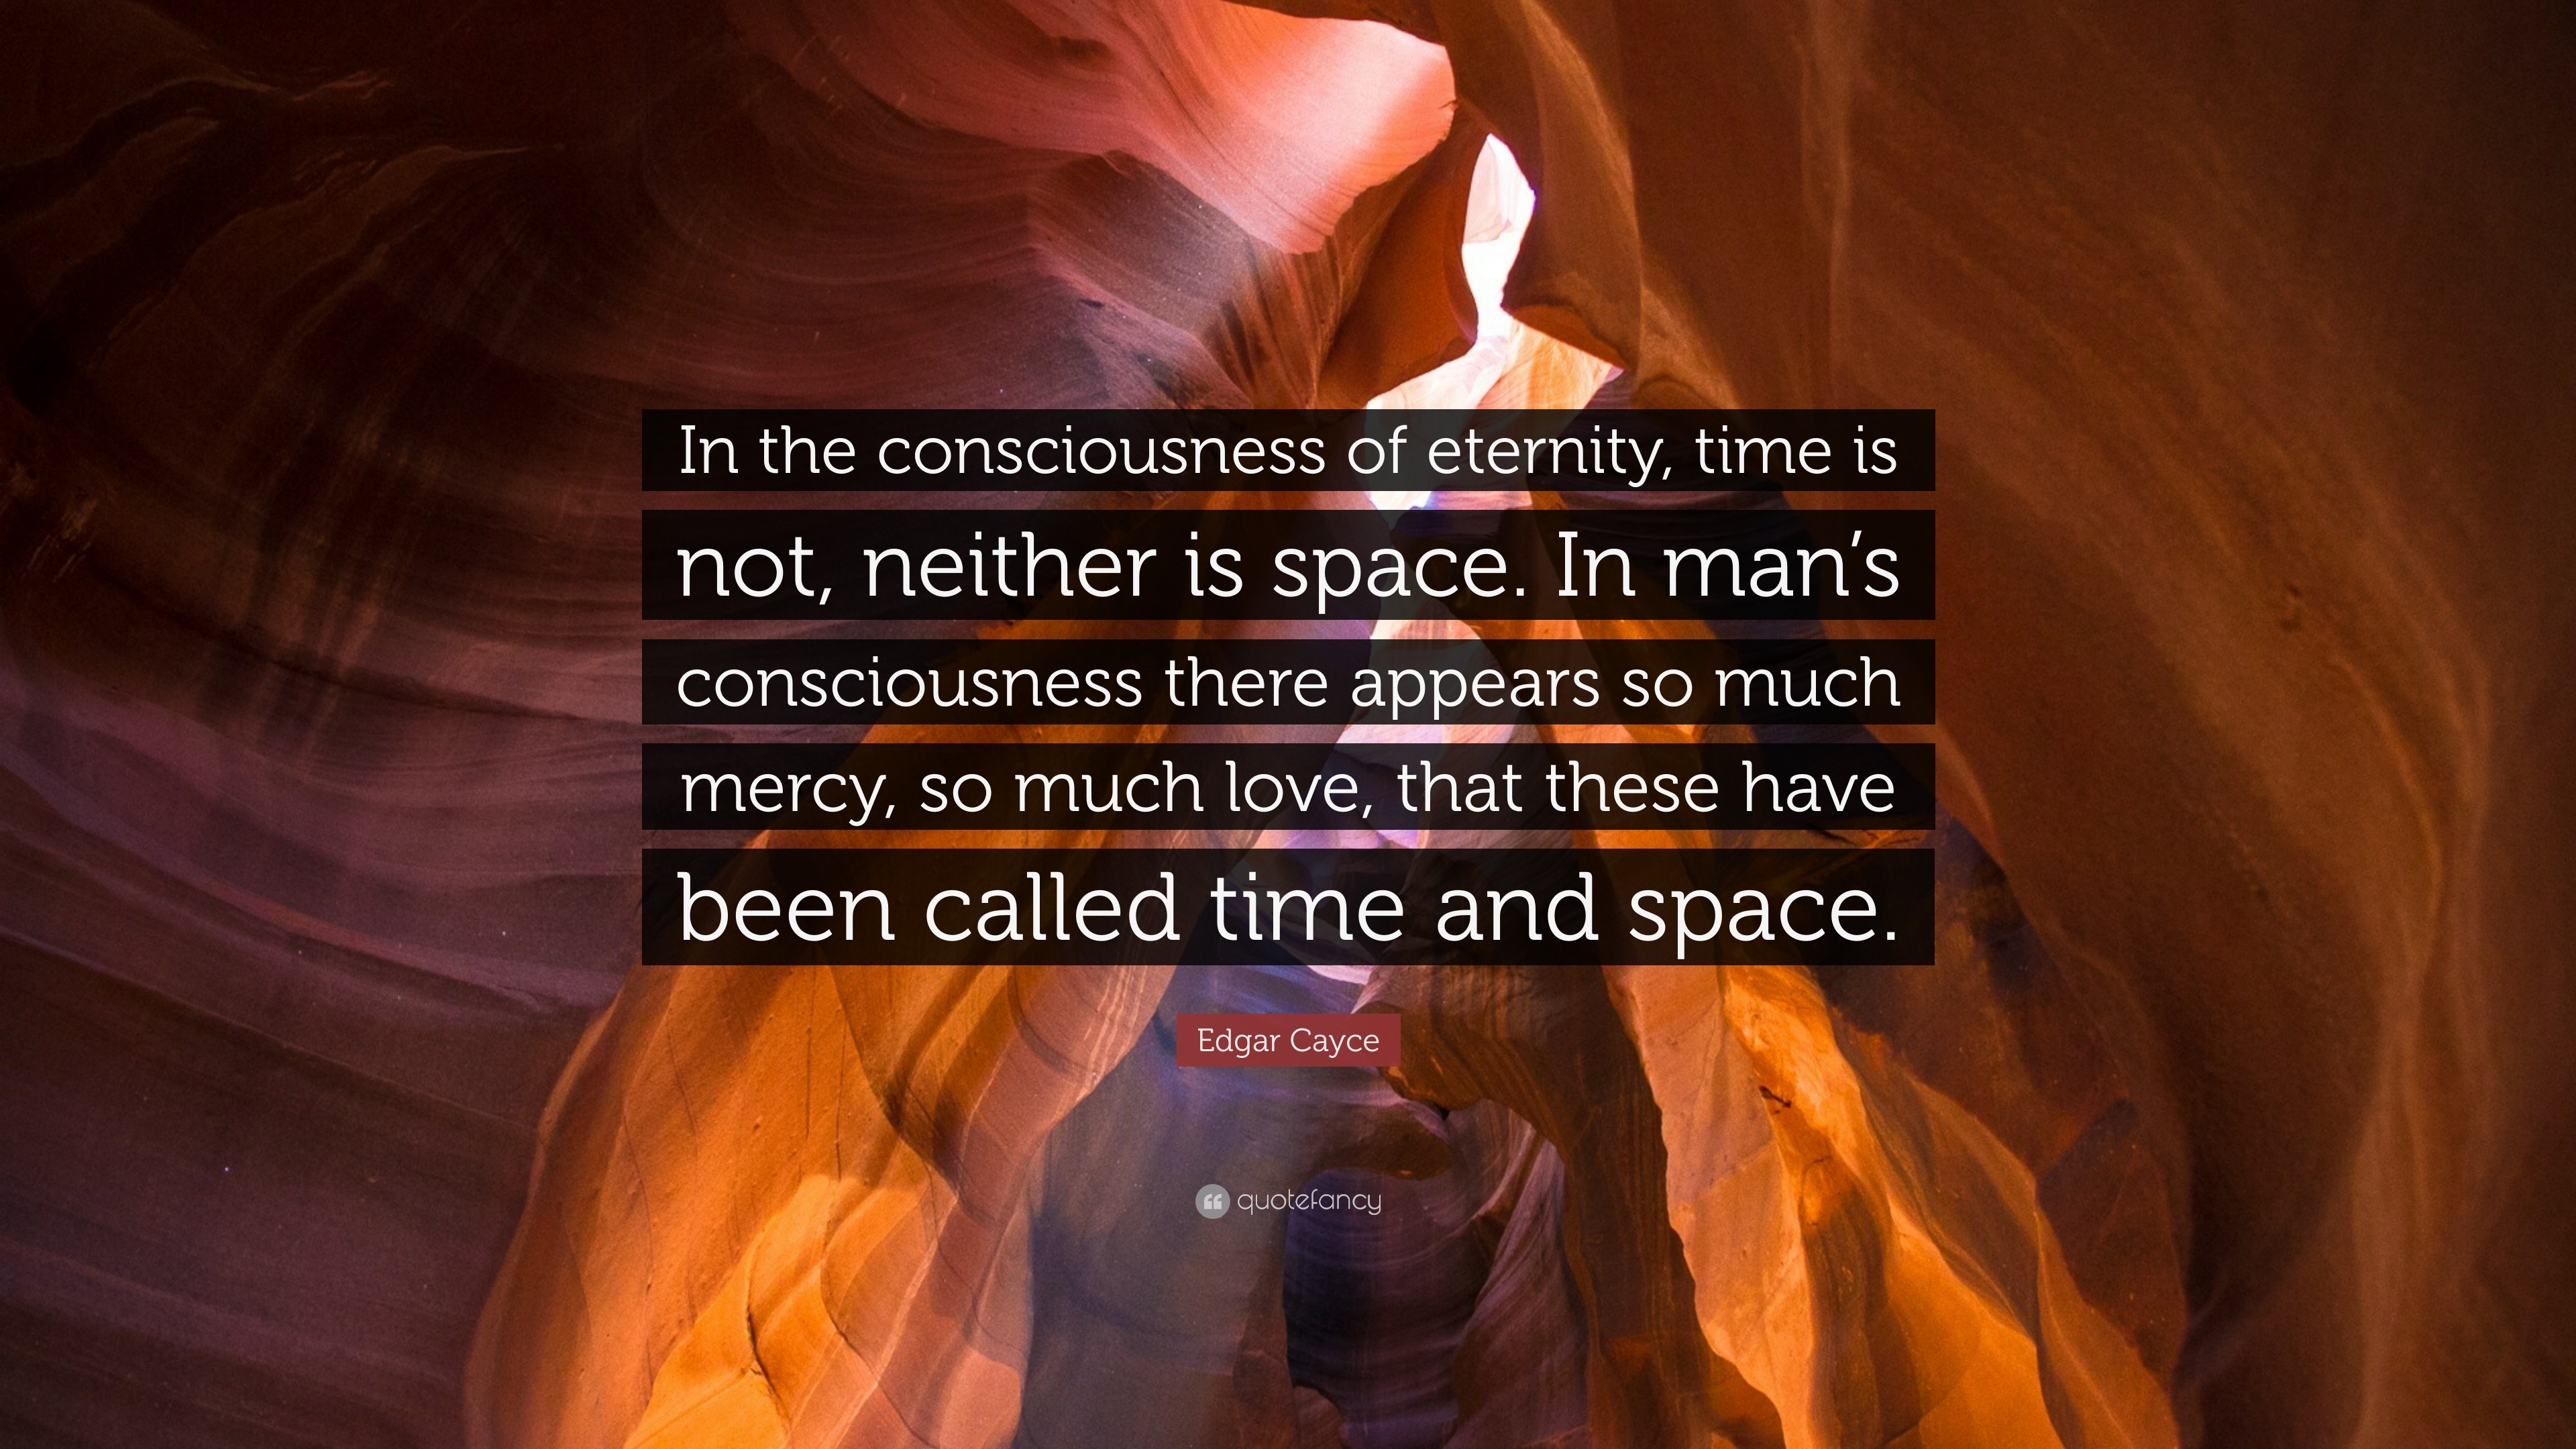 Edgar Cayce Quote: “In the consciousness of eternity, time is not